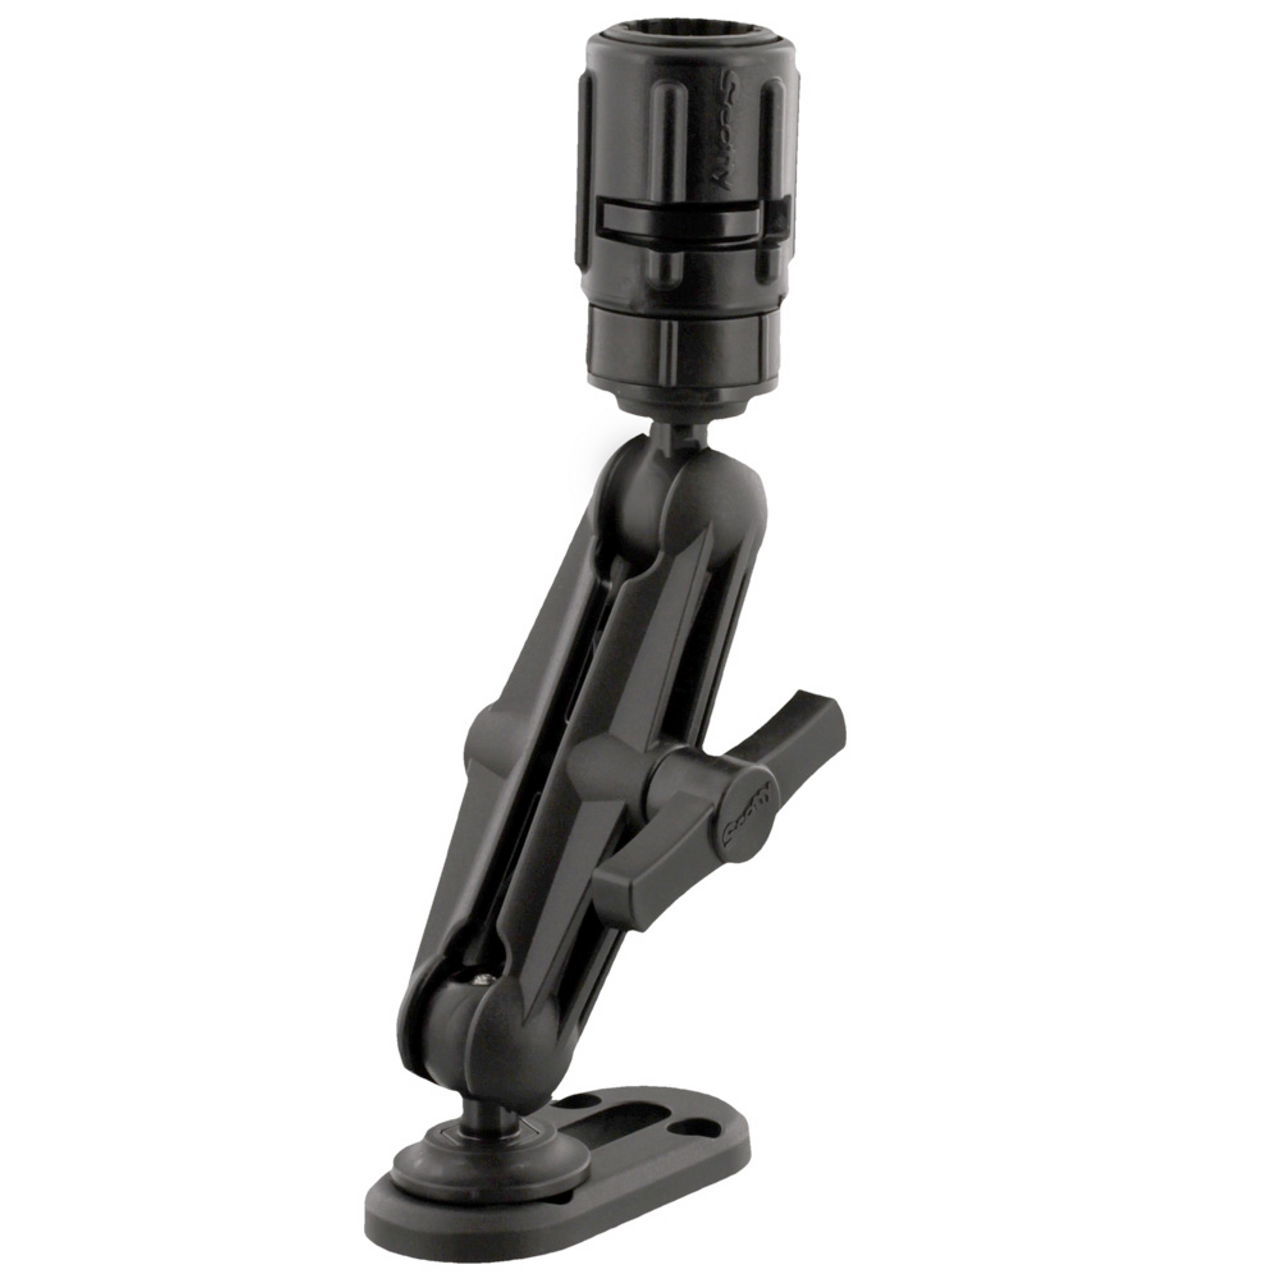 Scotty Ball Mounting System with GearHead and 1" Low Profile Track, Stands 9" Tall